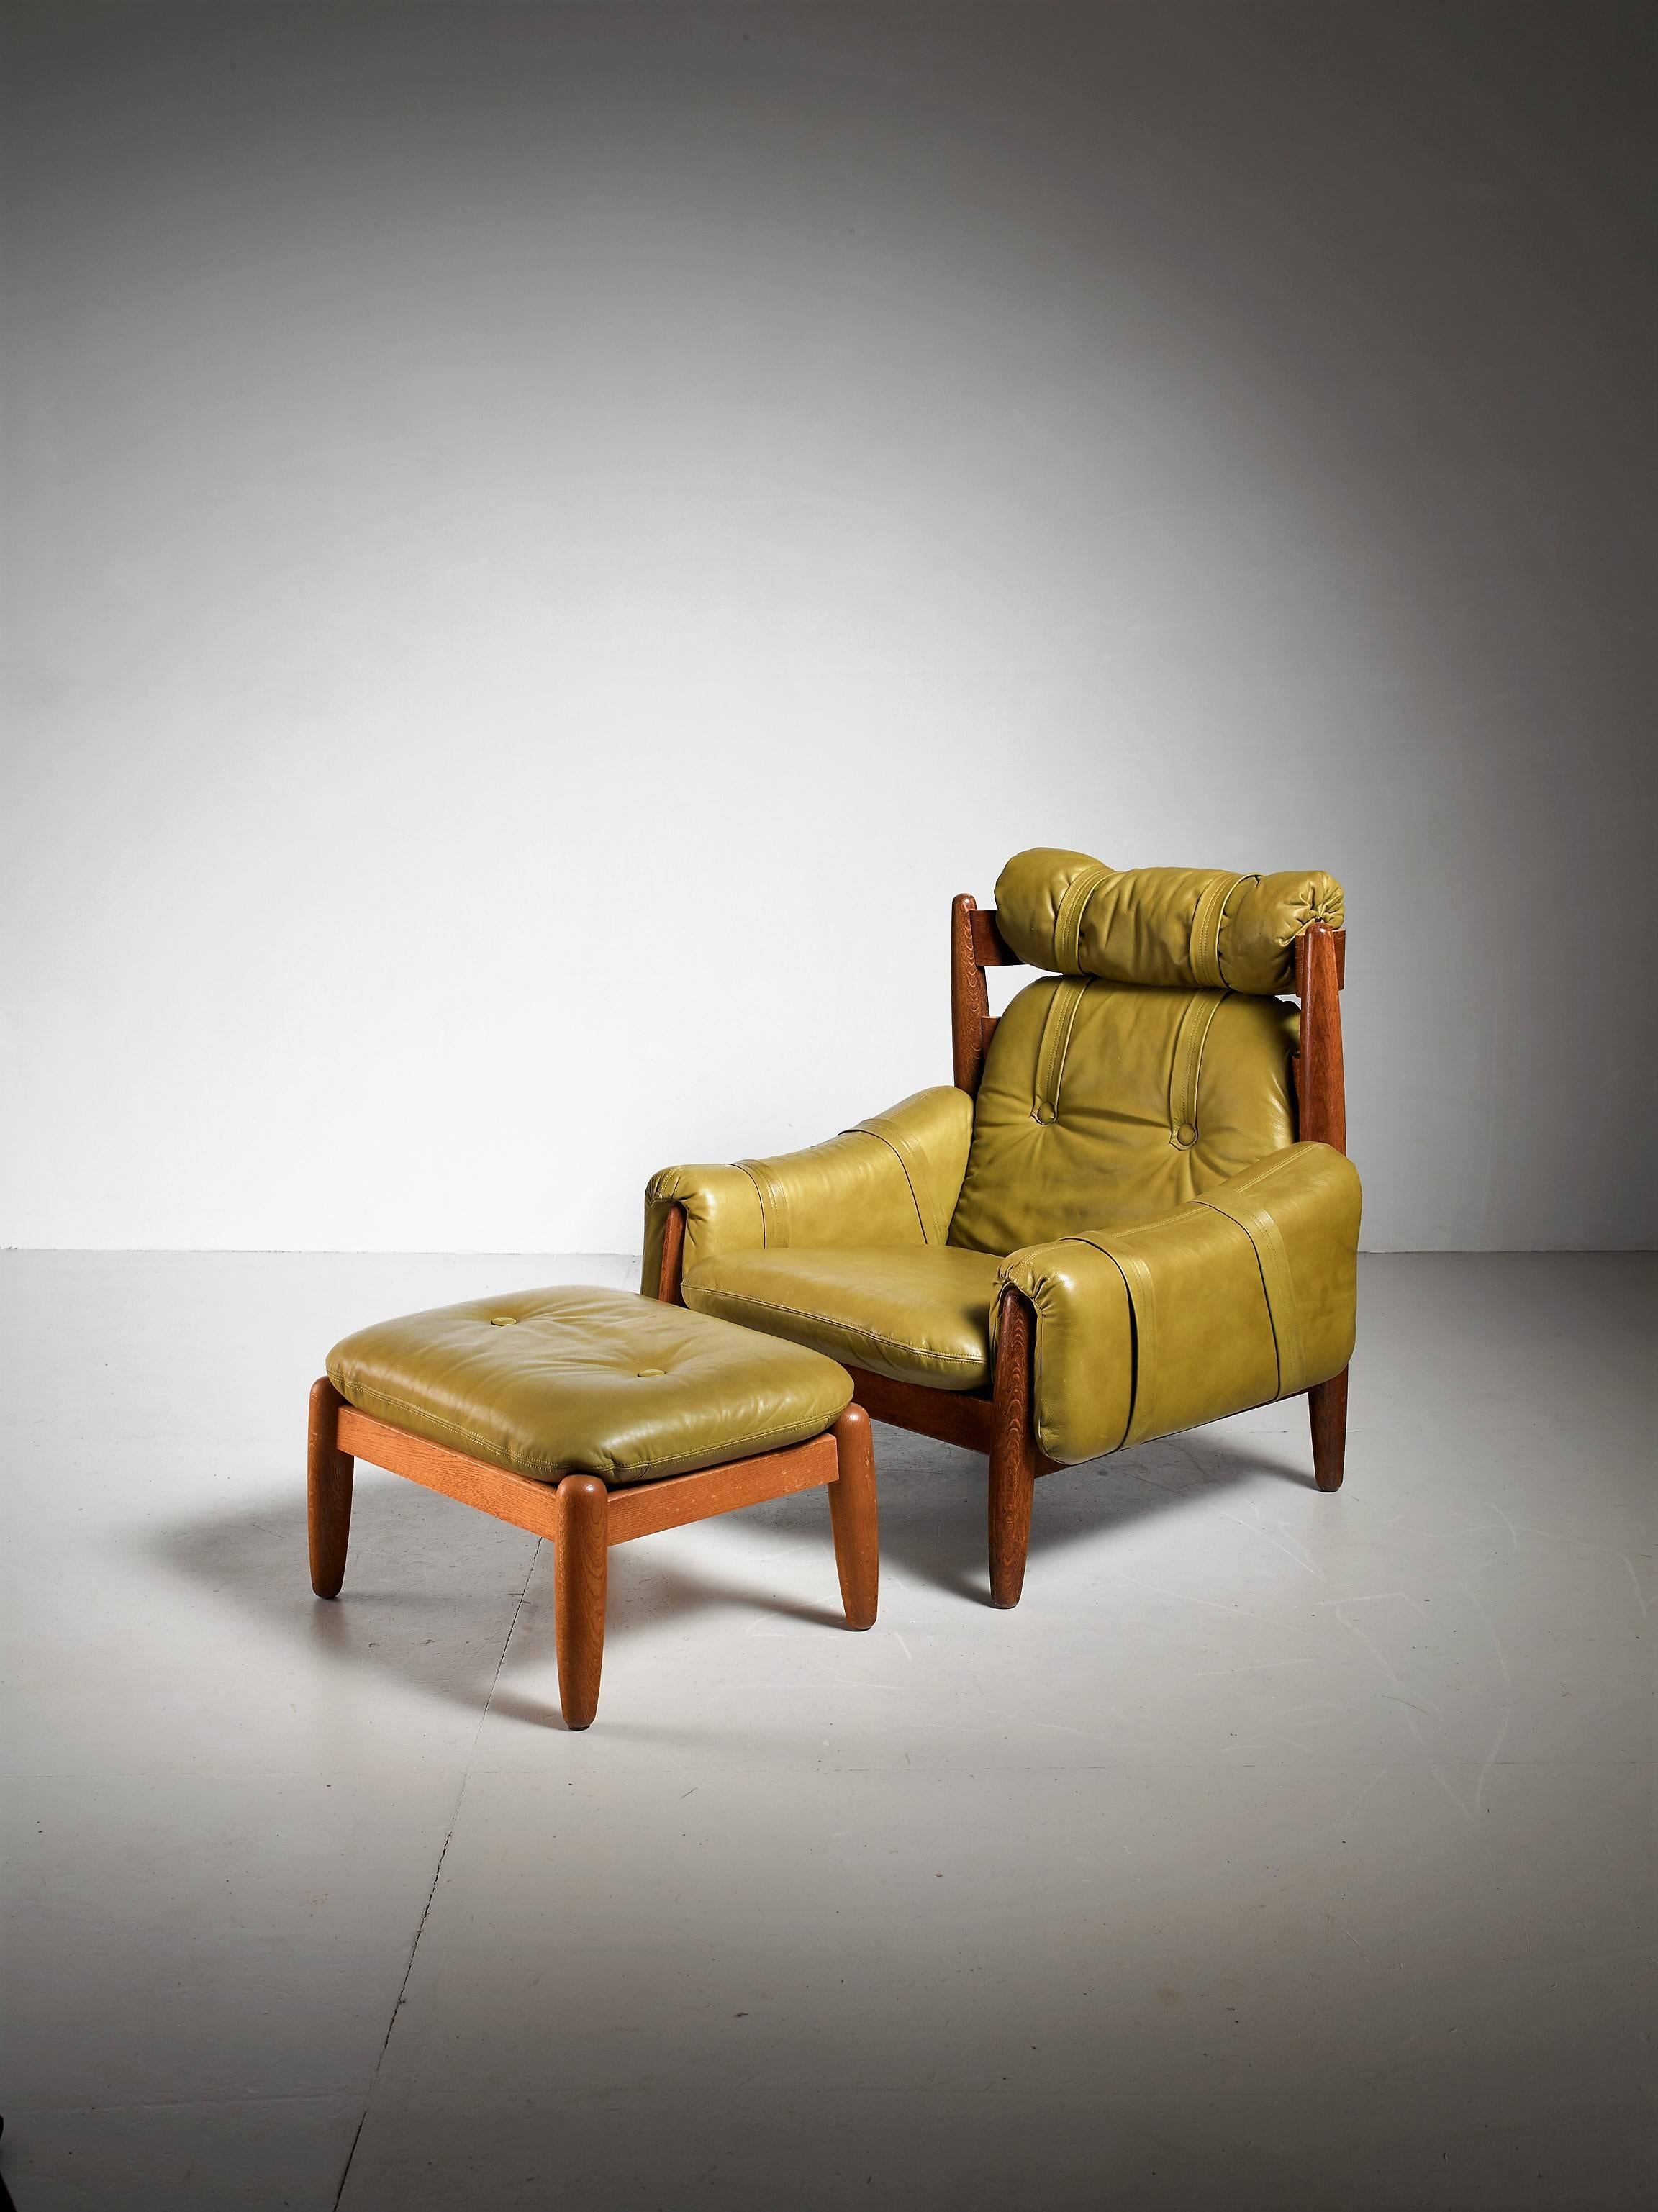 A Brazilian lounge chair with a matching ottoman in the manner of Percival Lafer. They are made of oak with green leather cushions.

The measurements stated are of the chair. The ottoman is 46 by 61 cm.
